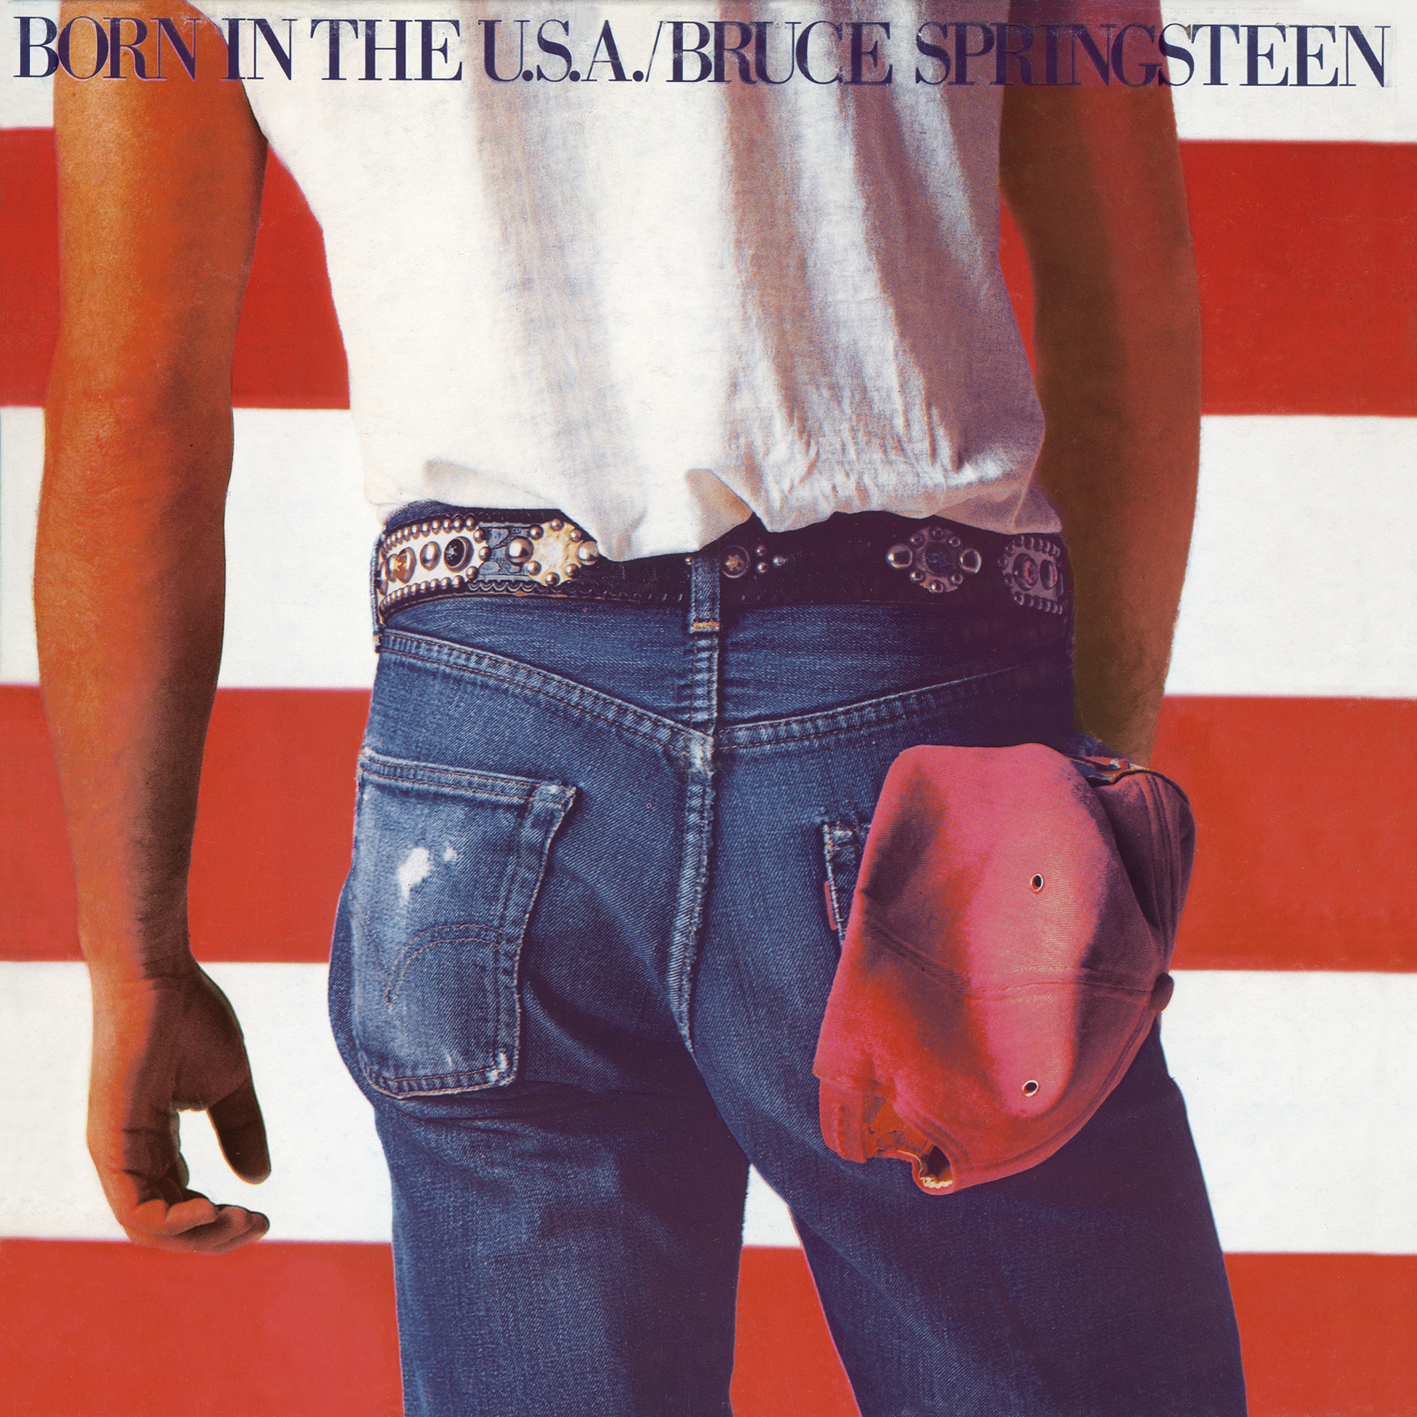 Born in the U.S.A. (album) | Great American Things